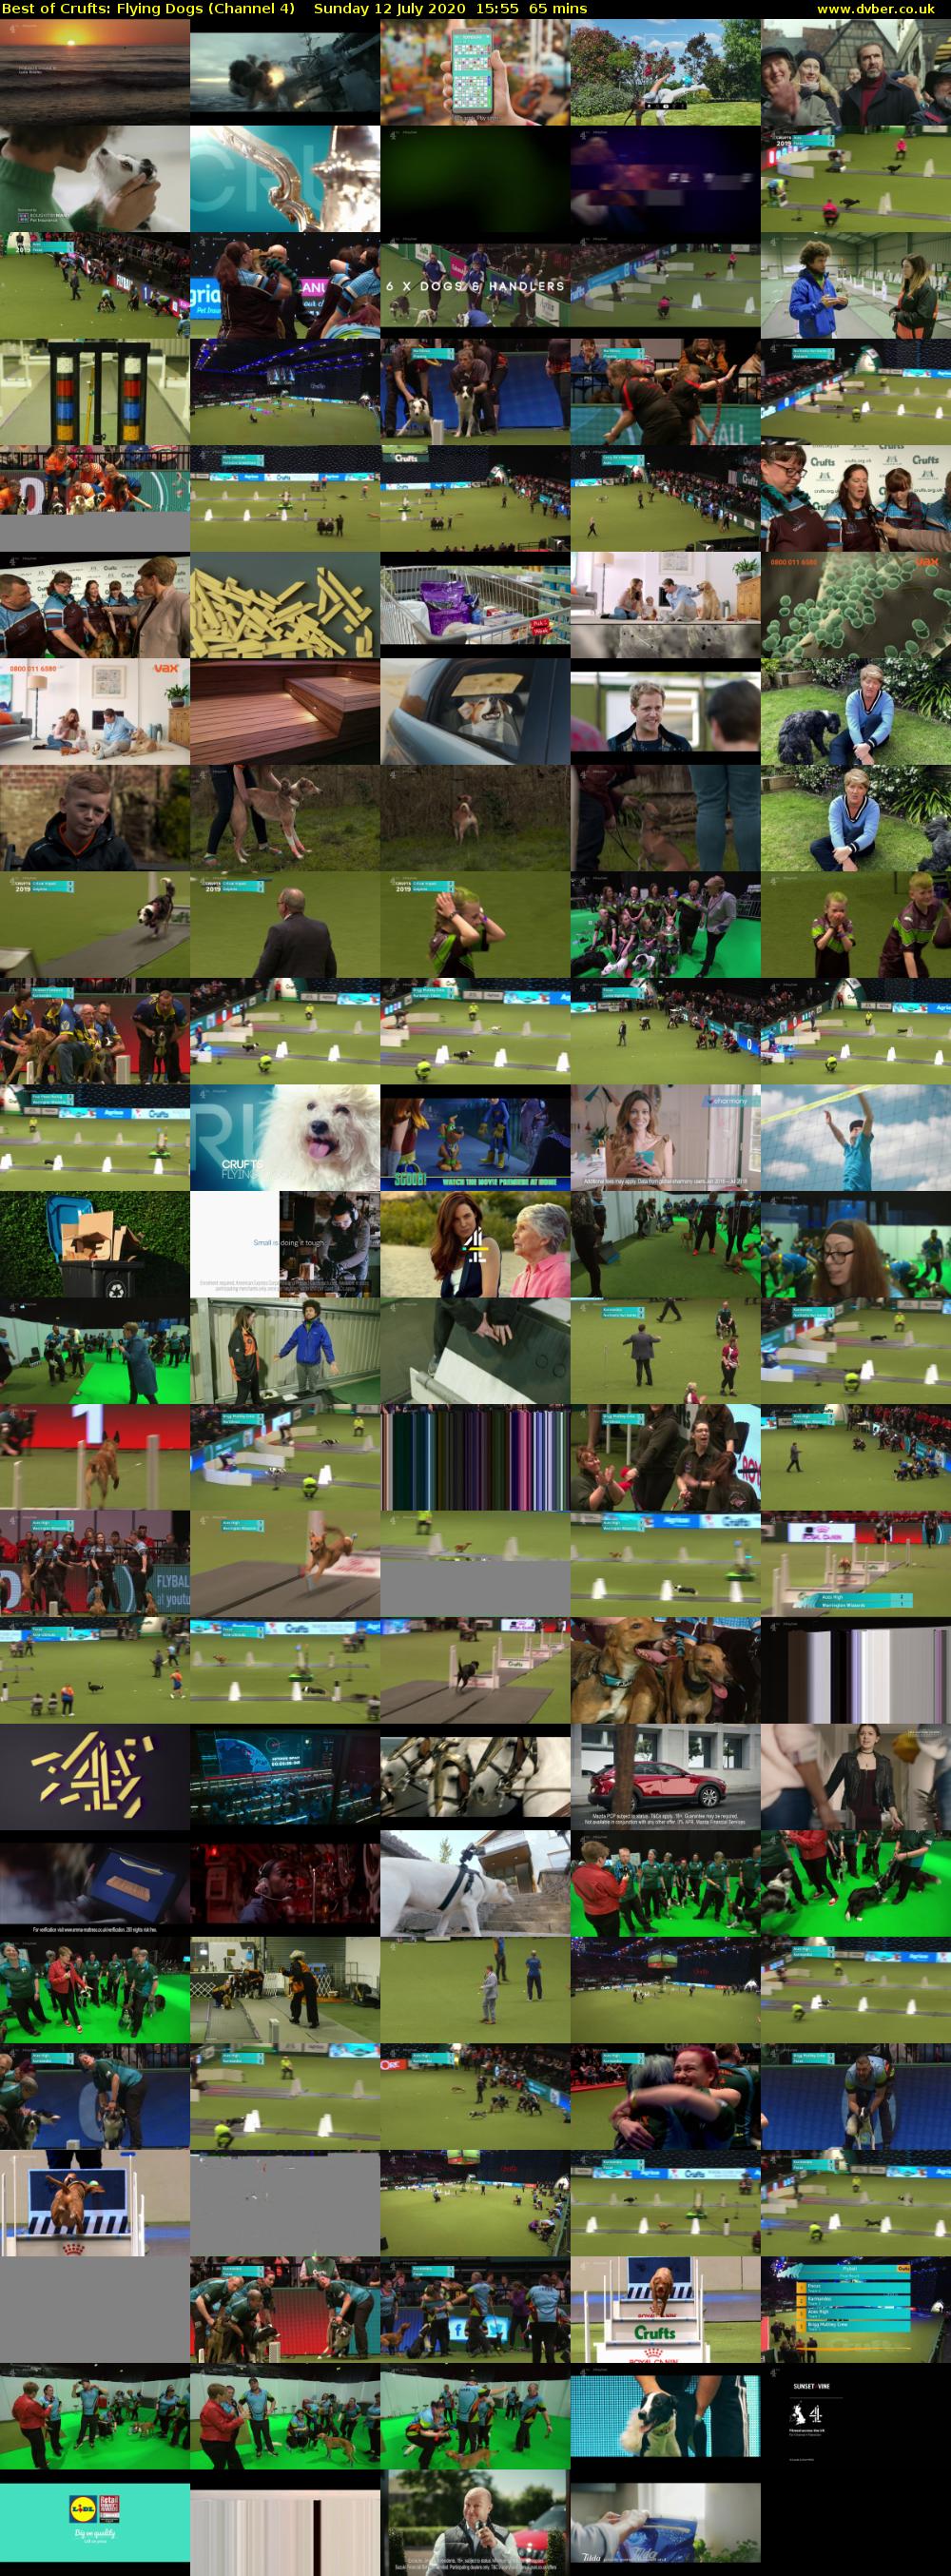 Best of Crufts: Flying Dogs (Channel 4) Sunday 12 July 2020 15:55 - 17:00